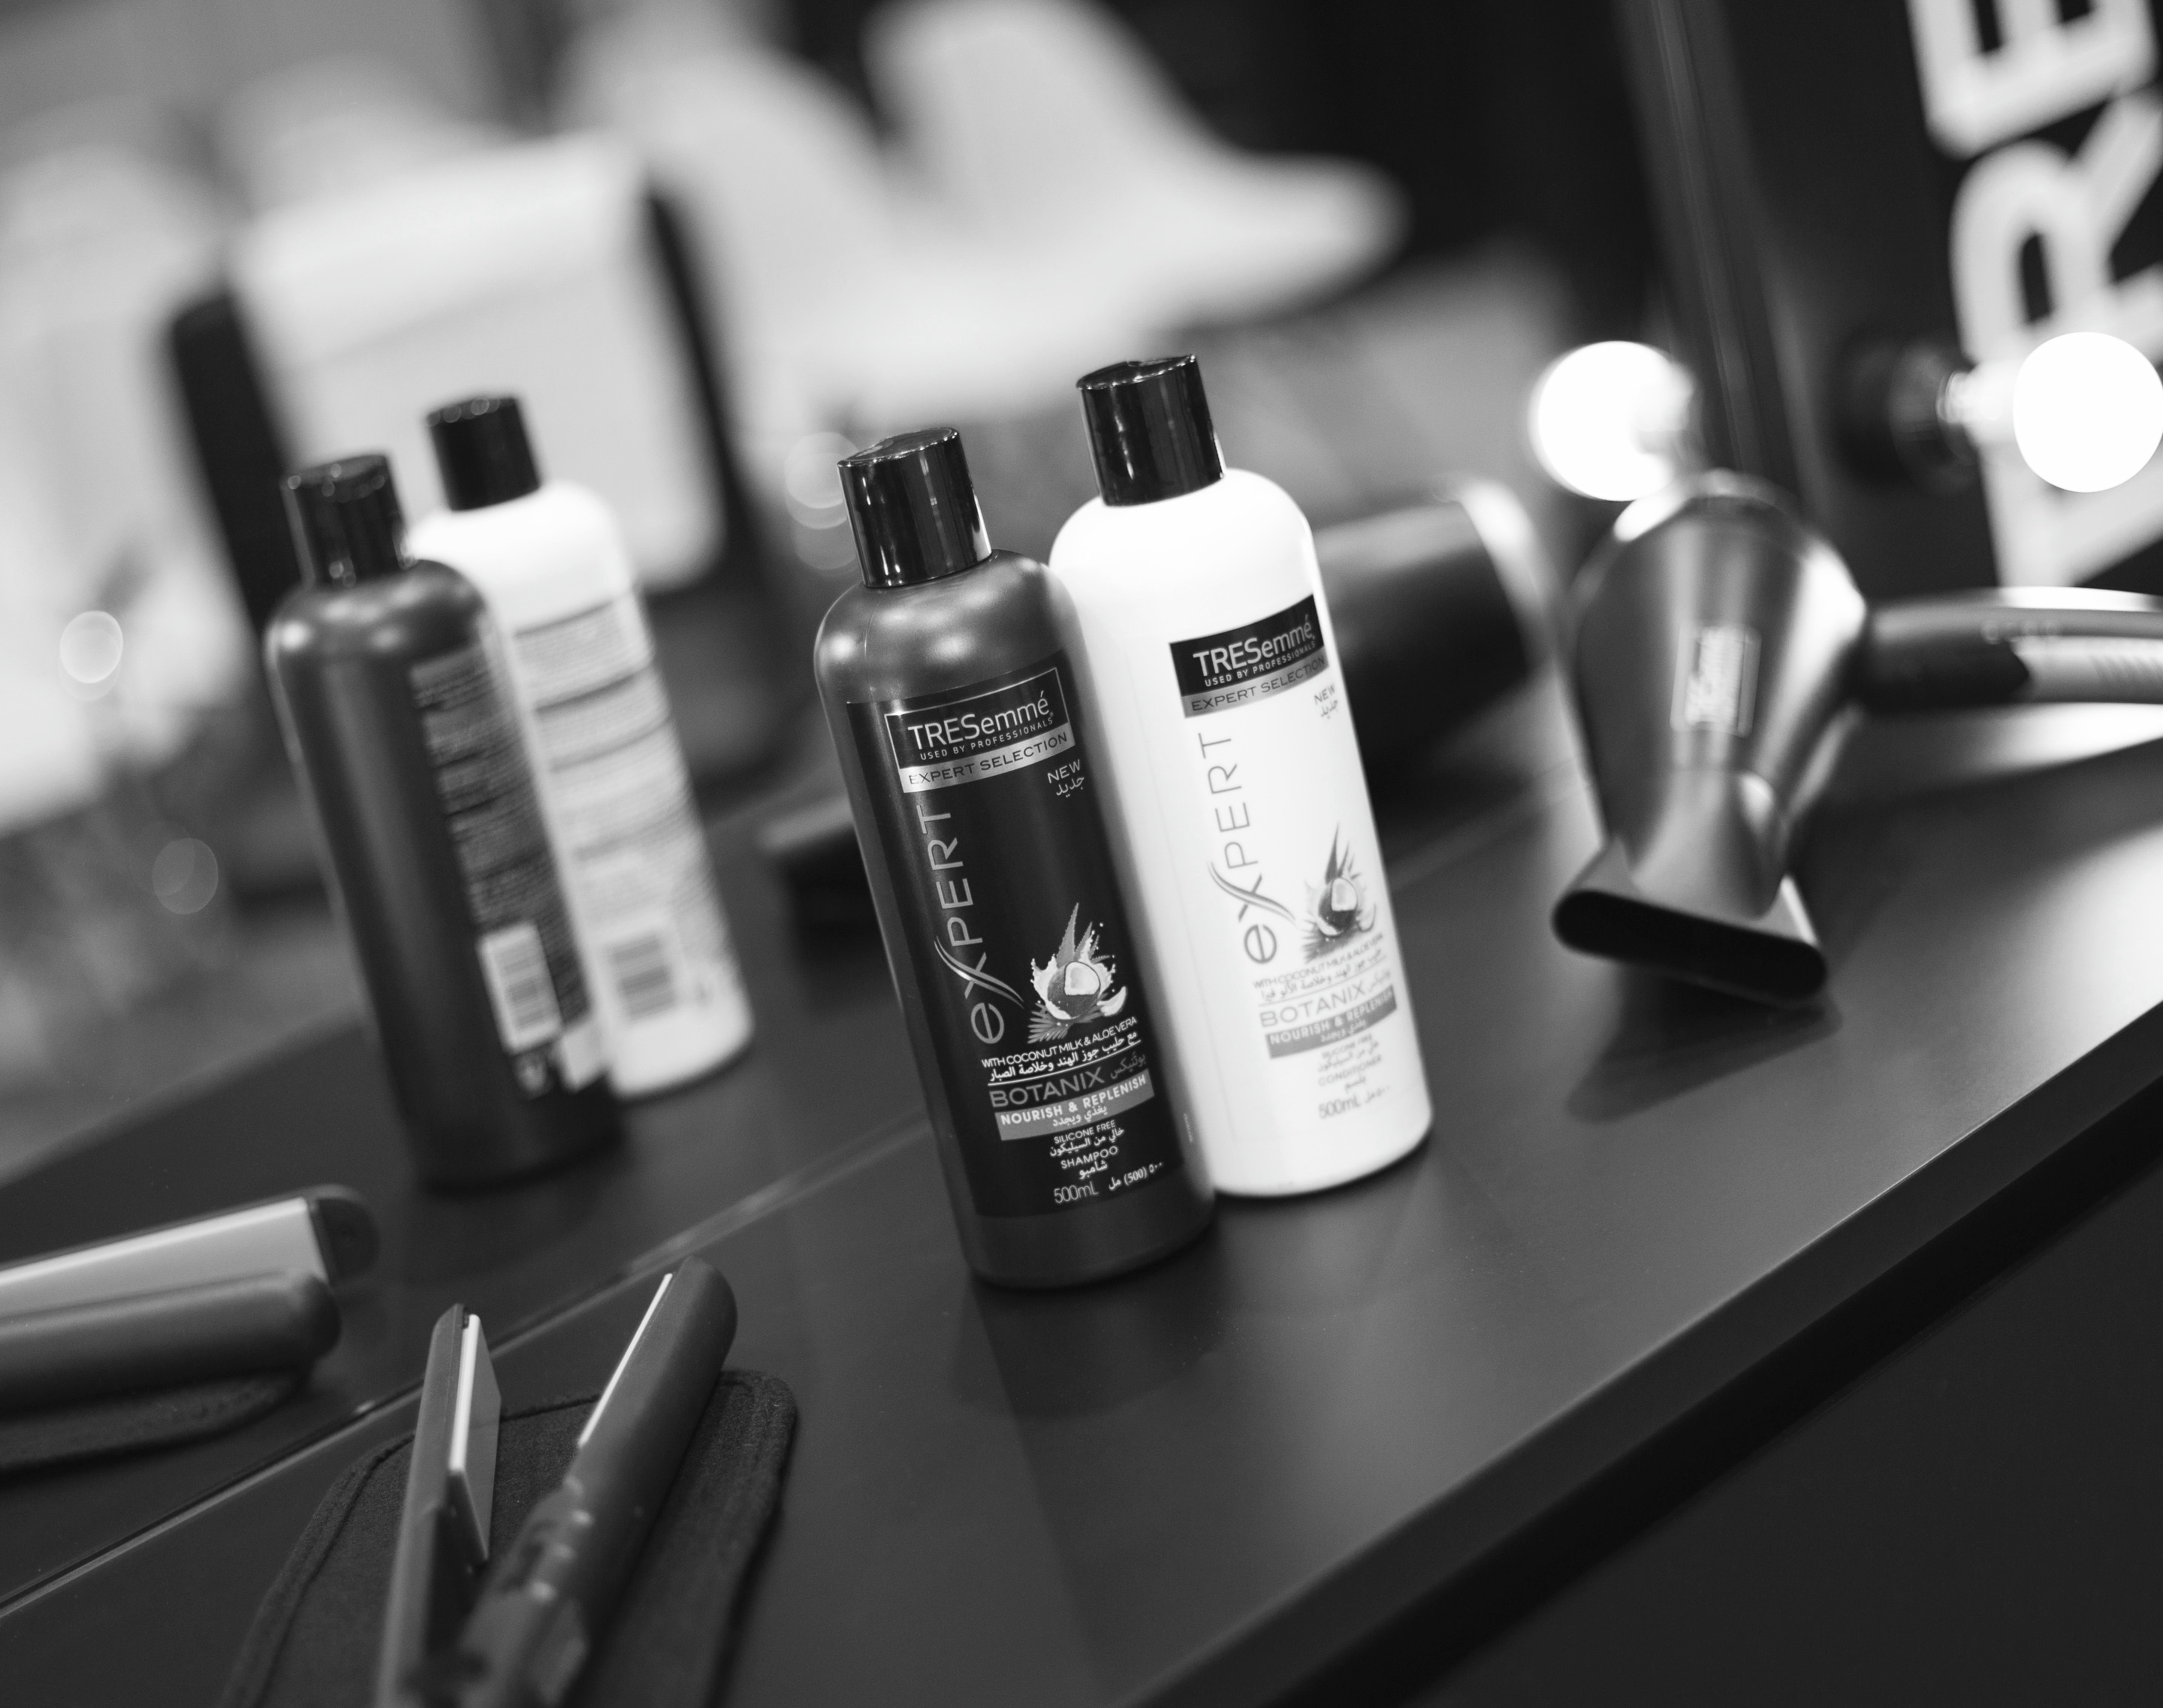 A range of Tresemme products.